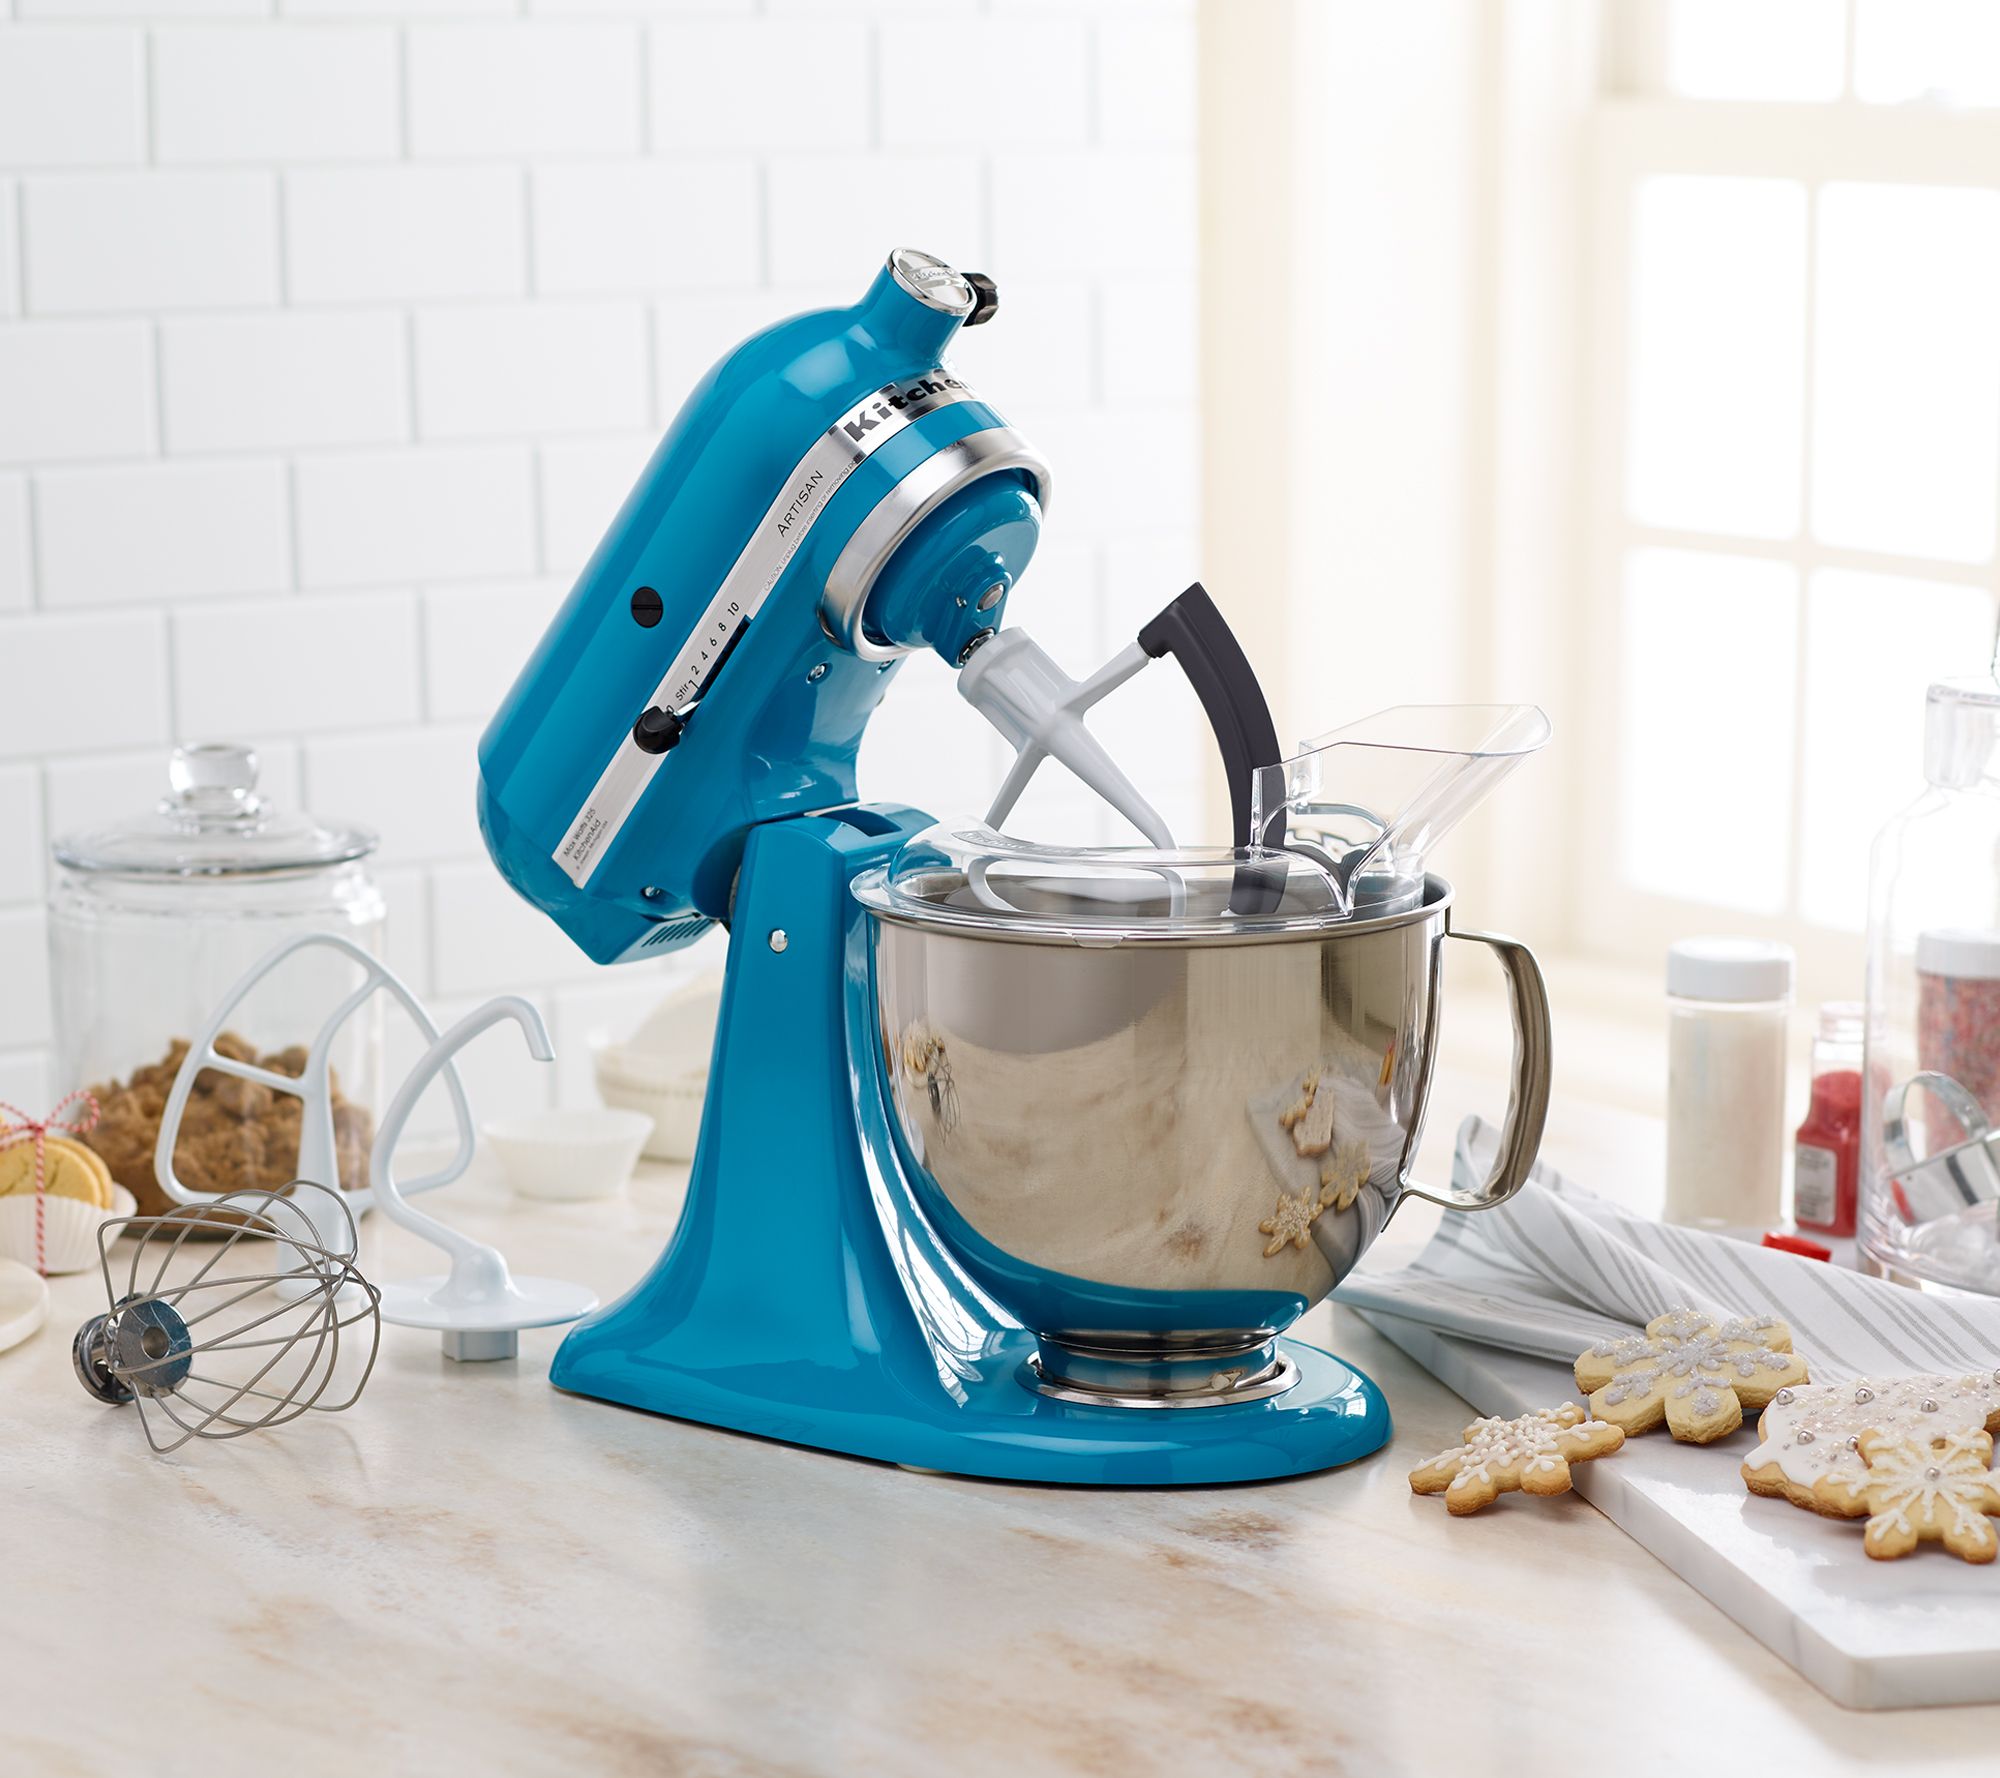 KitchenAid Mixer: Get this baking essential on sale at QVC today